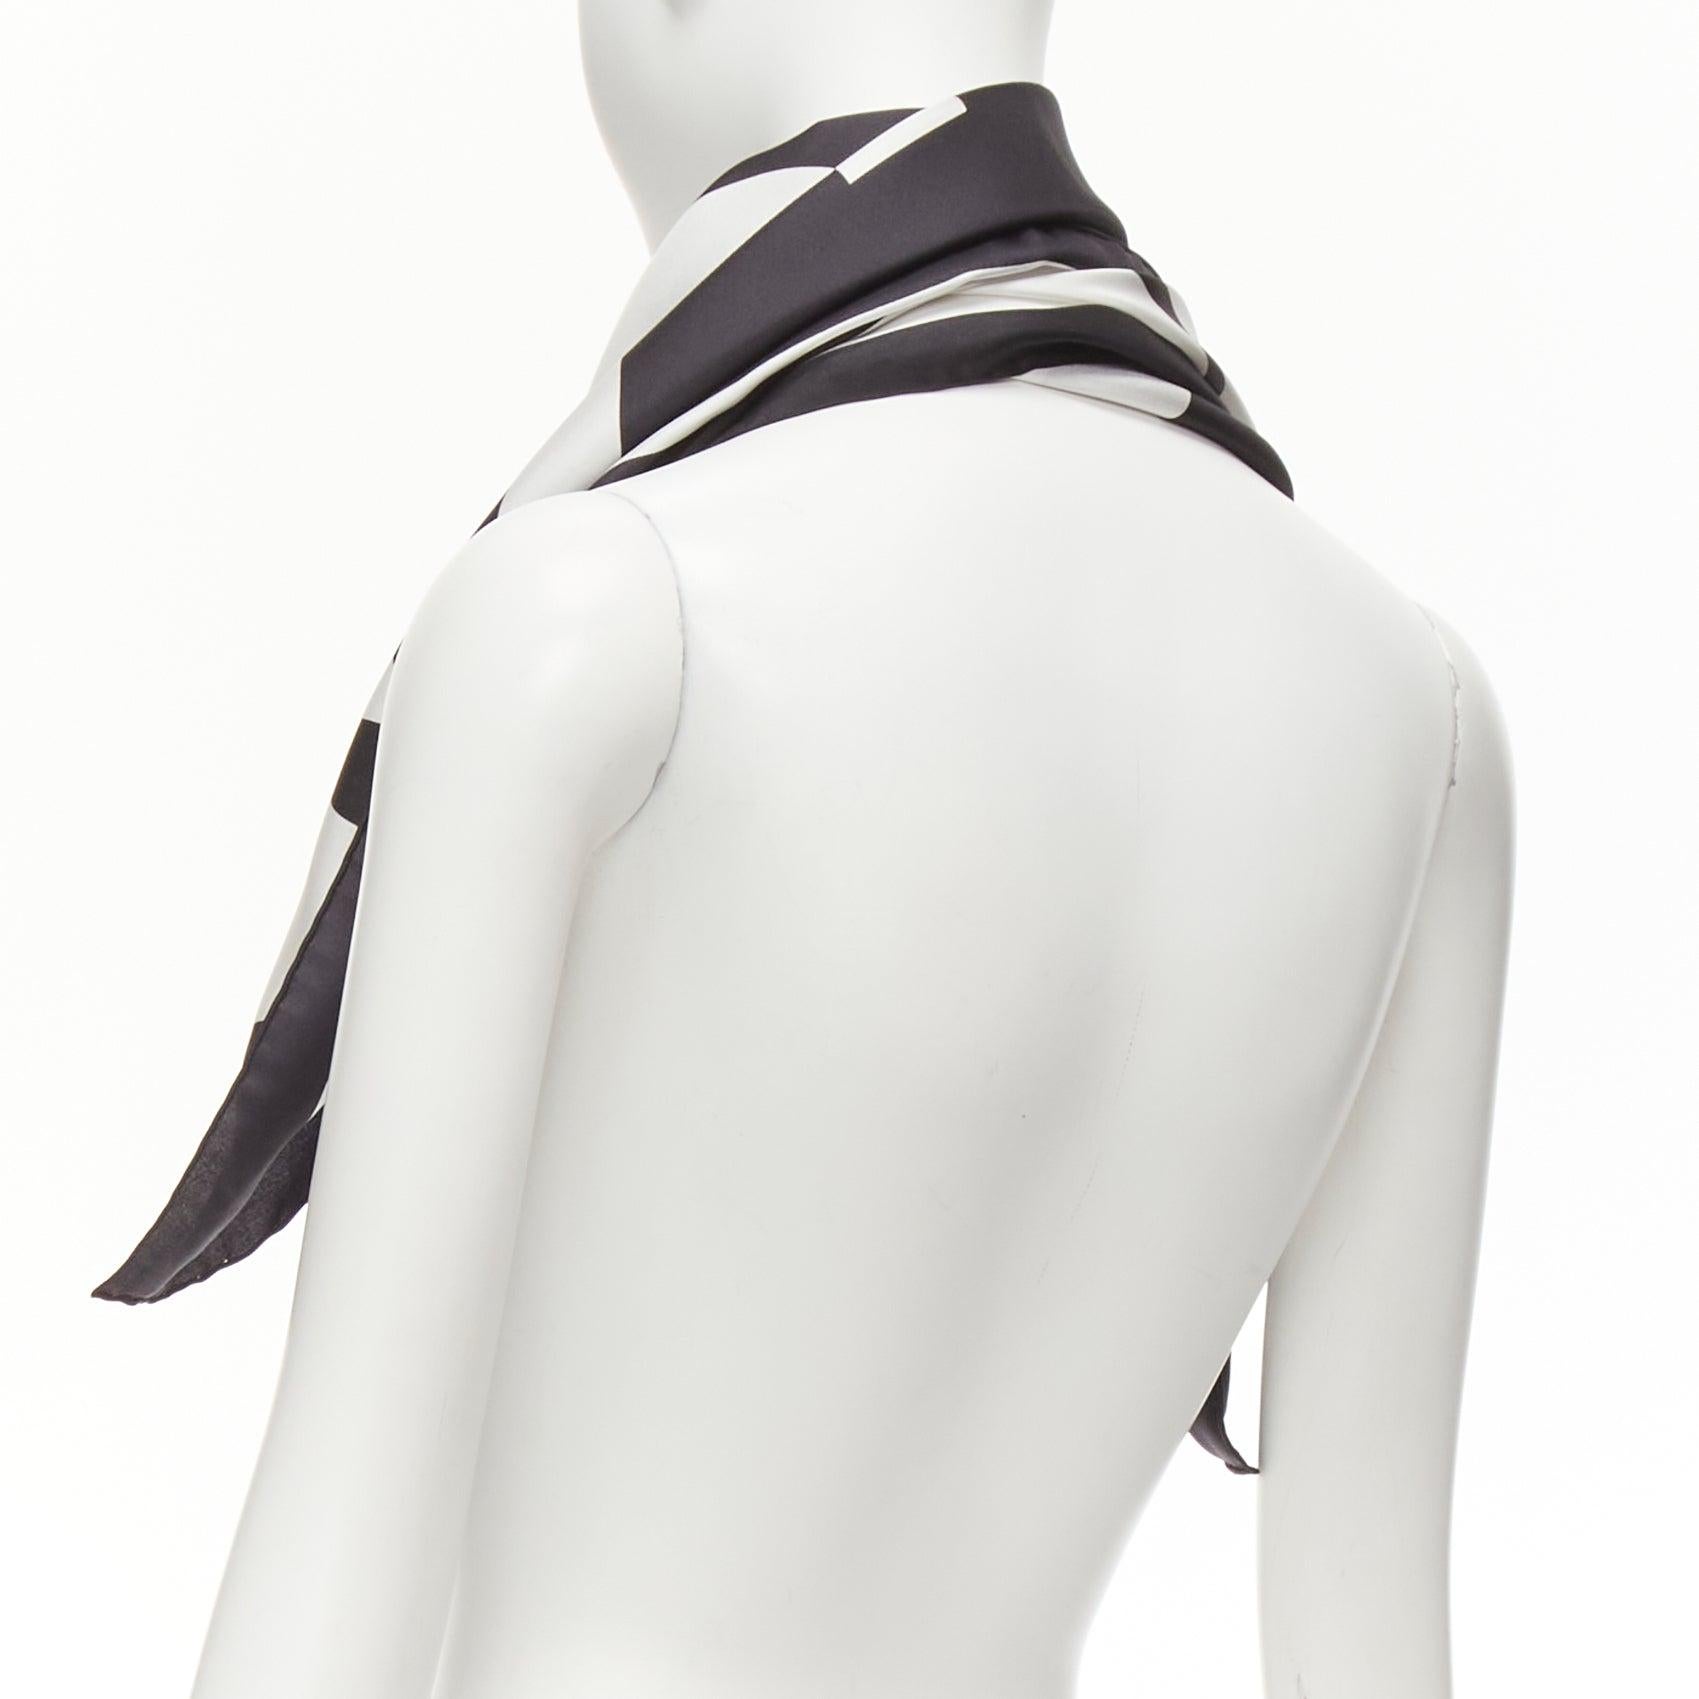 CHANEL 100% silk black white bold CC logo abstract graphic big square scarf For Sale 2